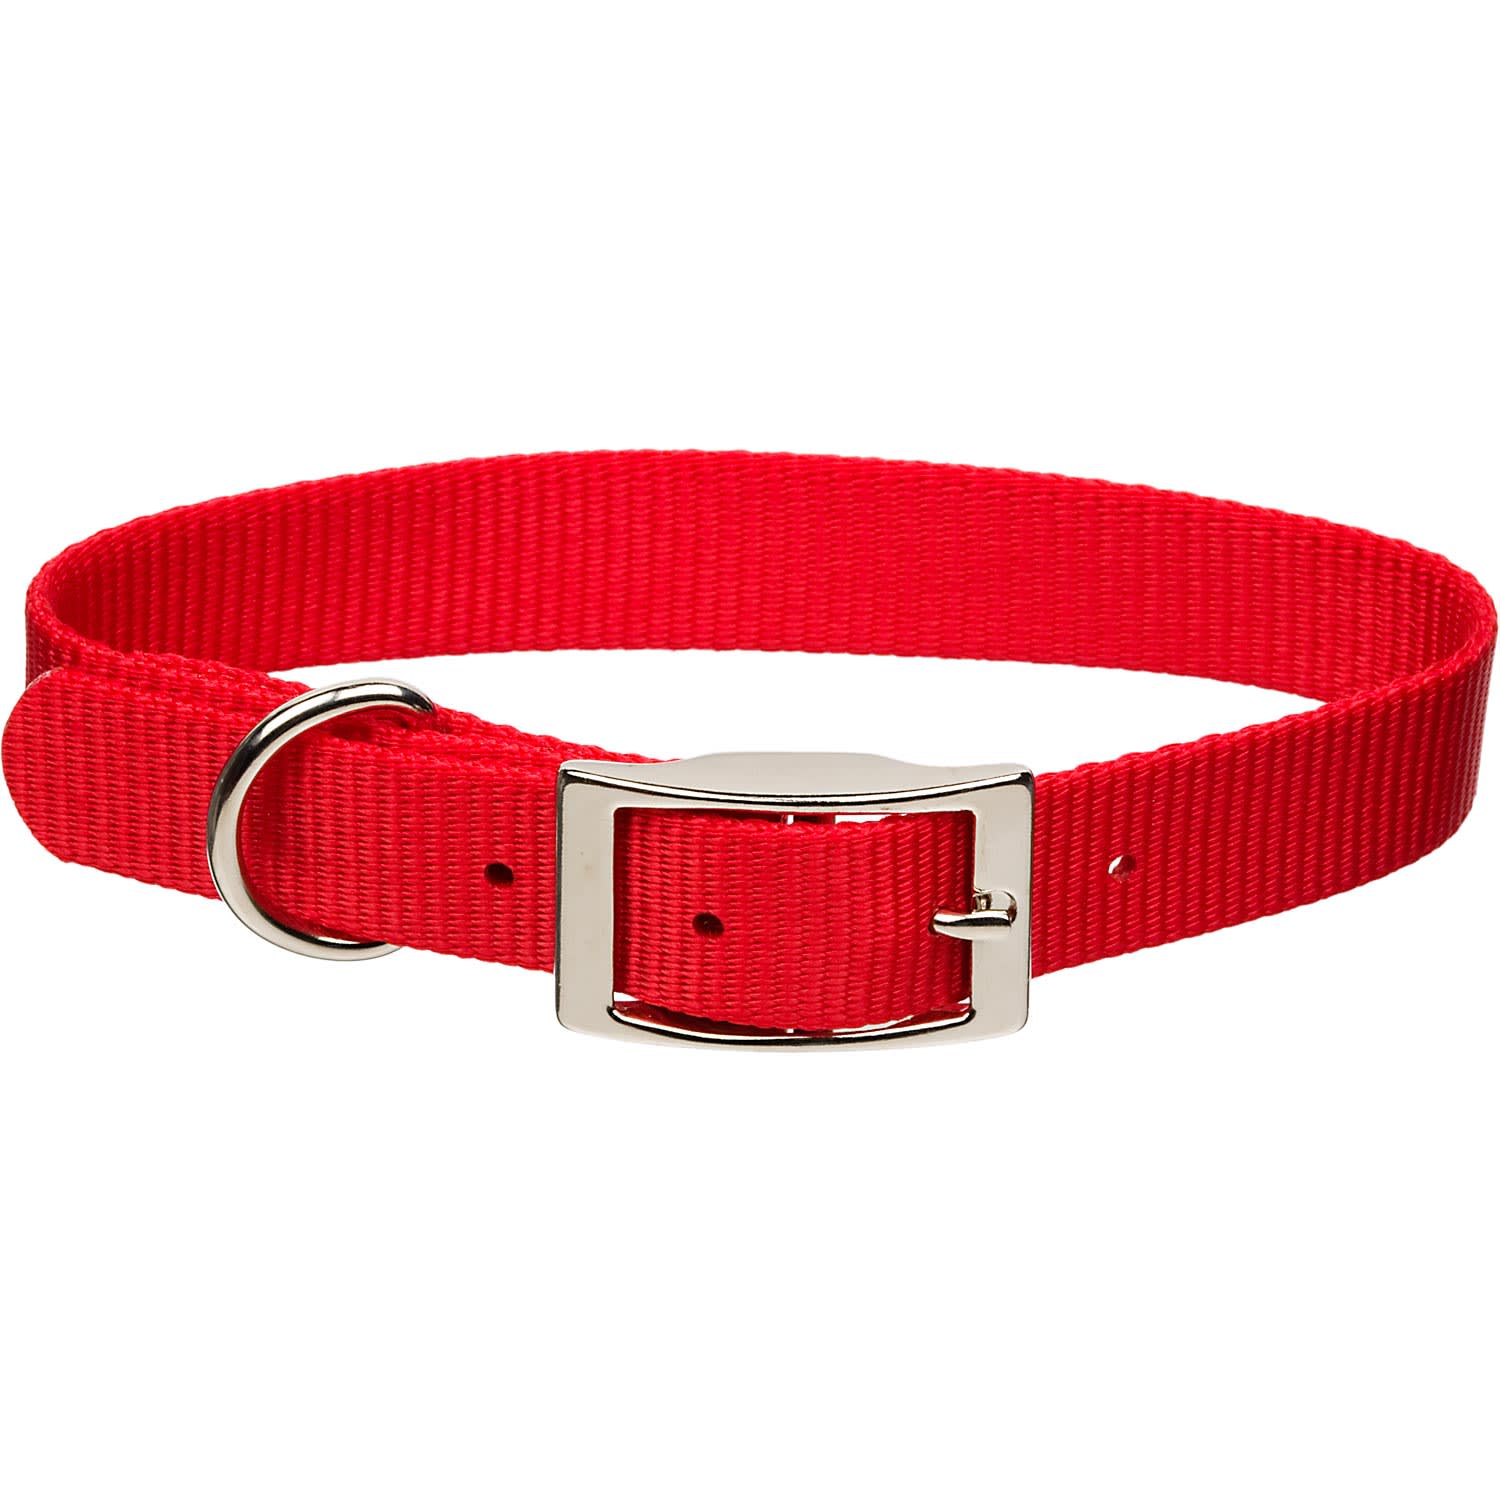 Coastal Pet Metal Buckle Nylon Personalized Dog Collar in Red, 3/4